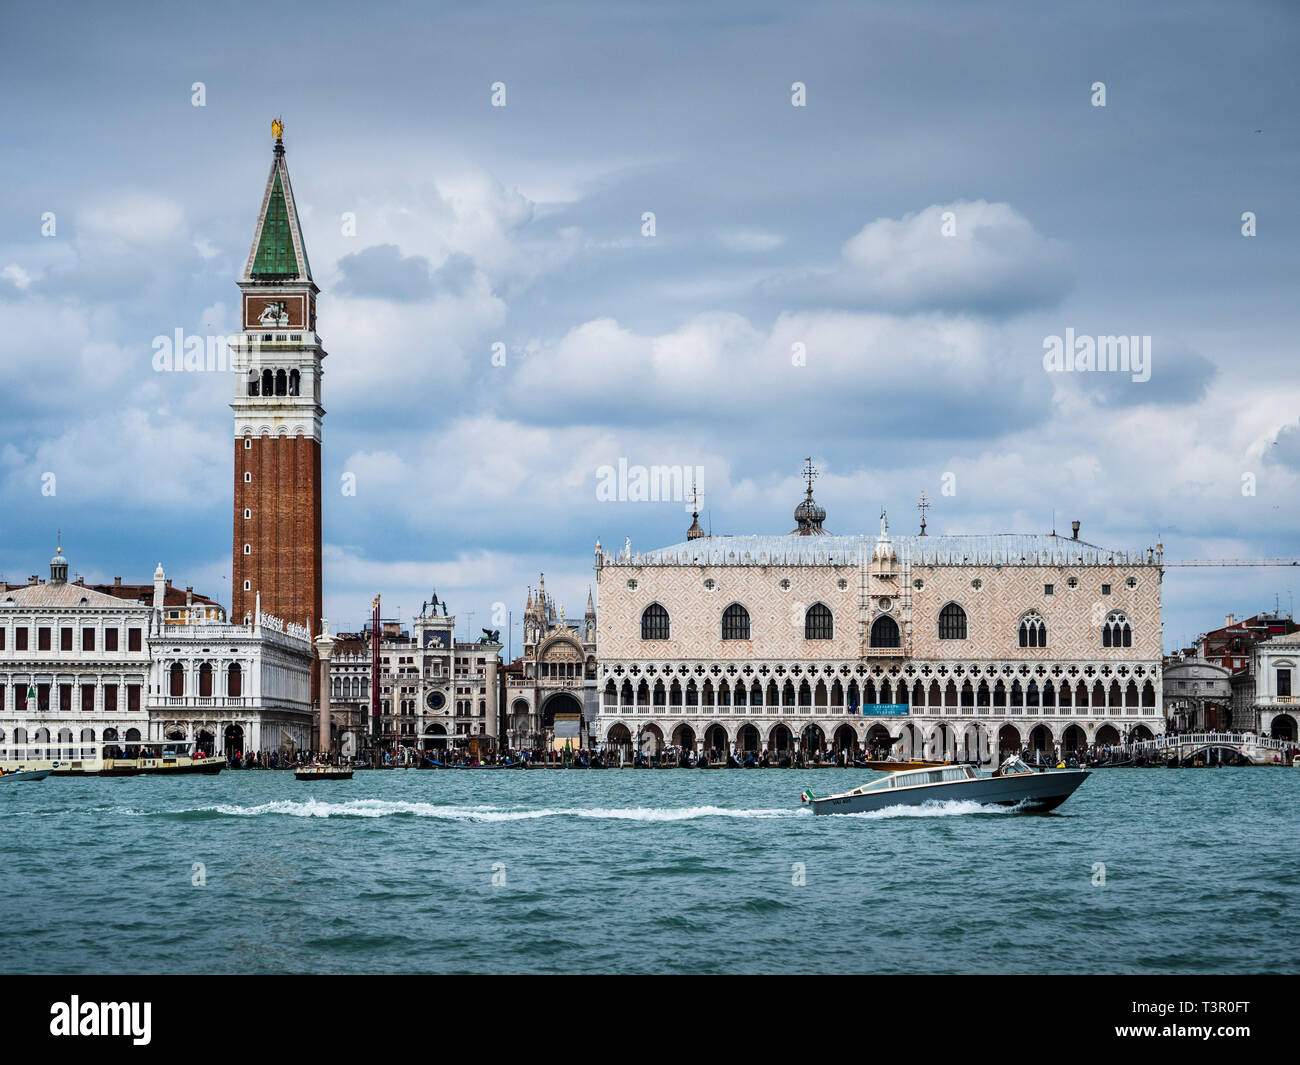 Venice - Entrance to St Marks Square, St Mark's Campanile and the Doge's Palace from the Grand Canal Stock Photo